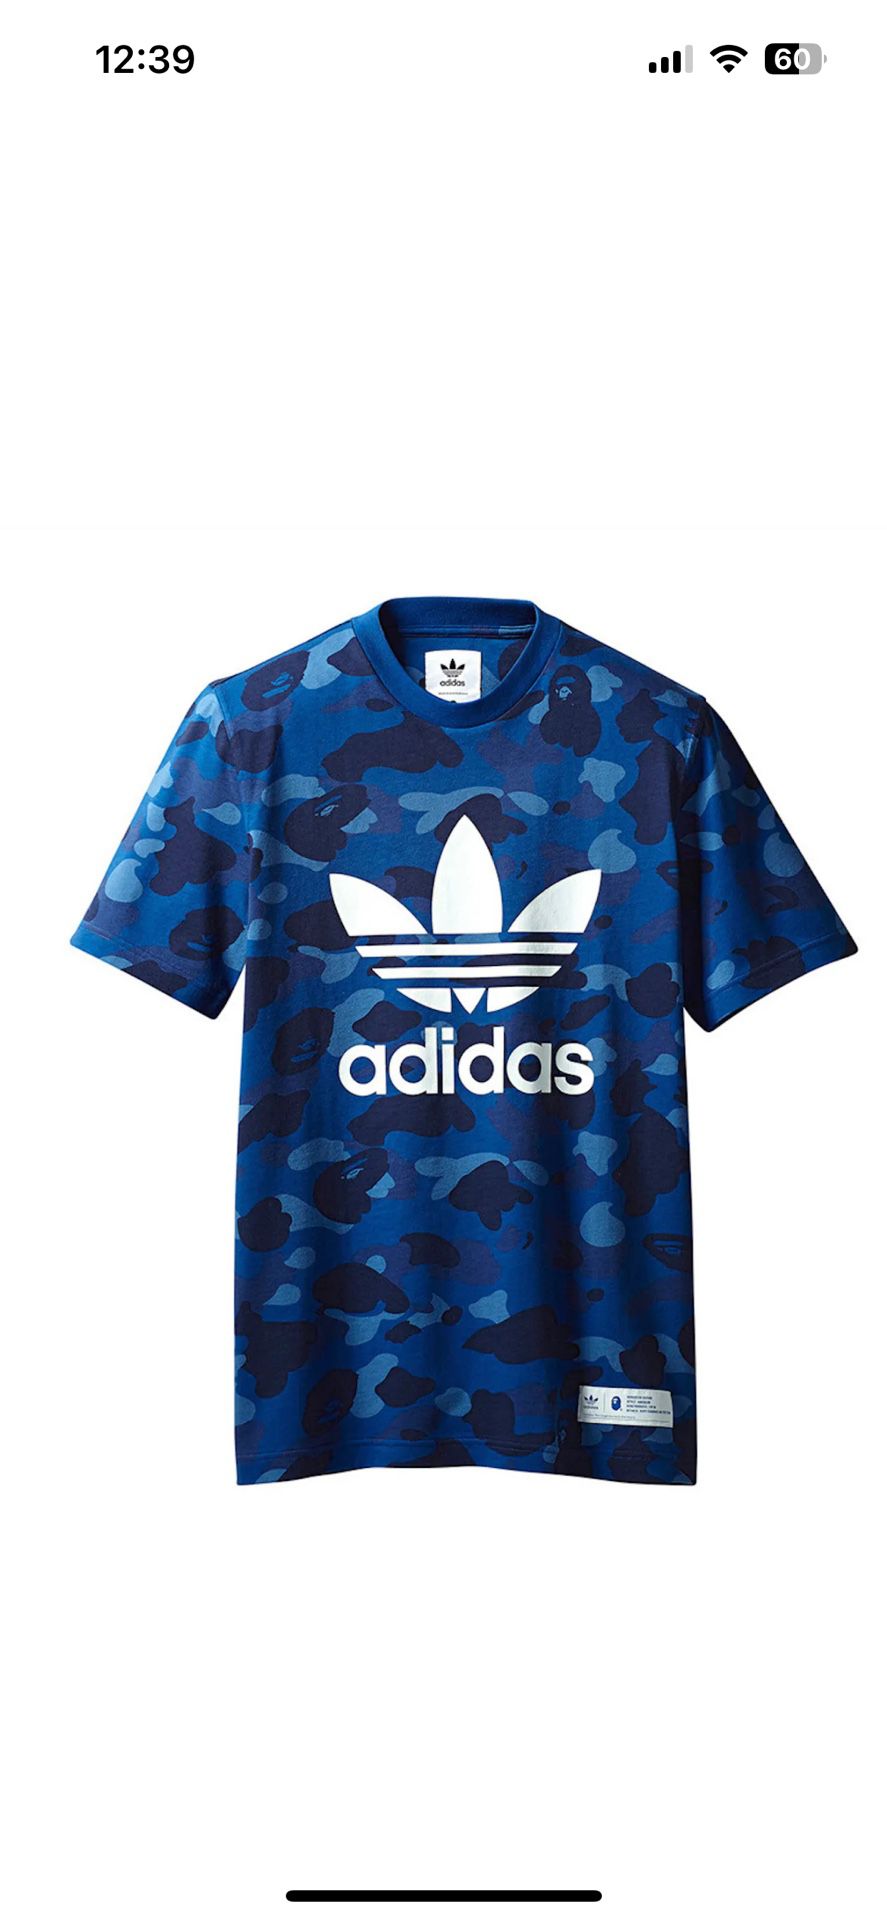 Bape Adidas Tee Shirt Limited Edition New with Tags 